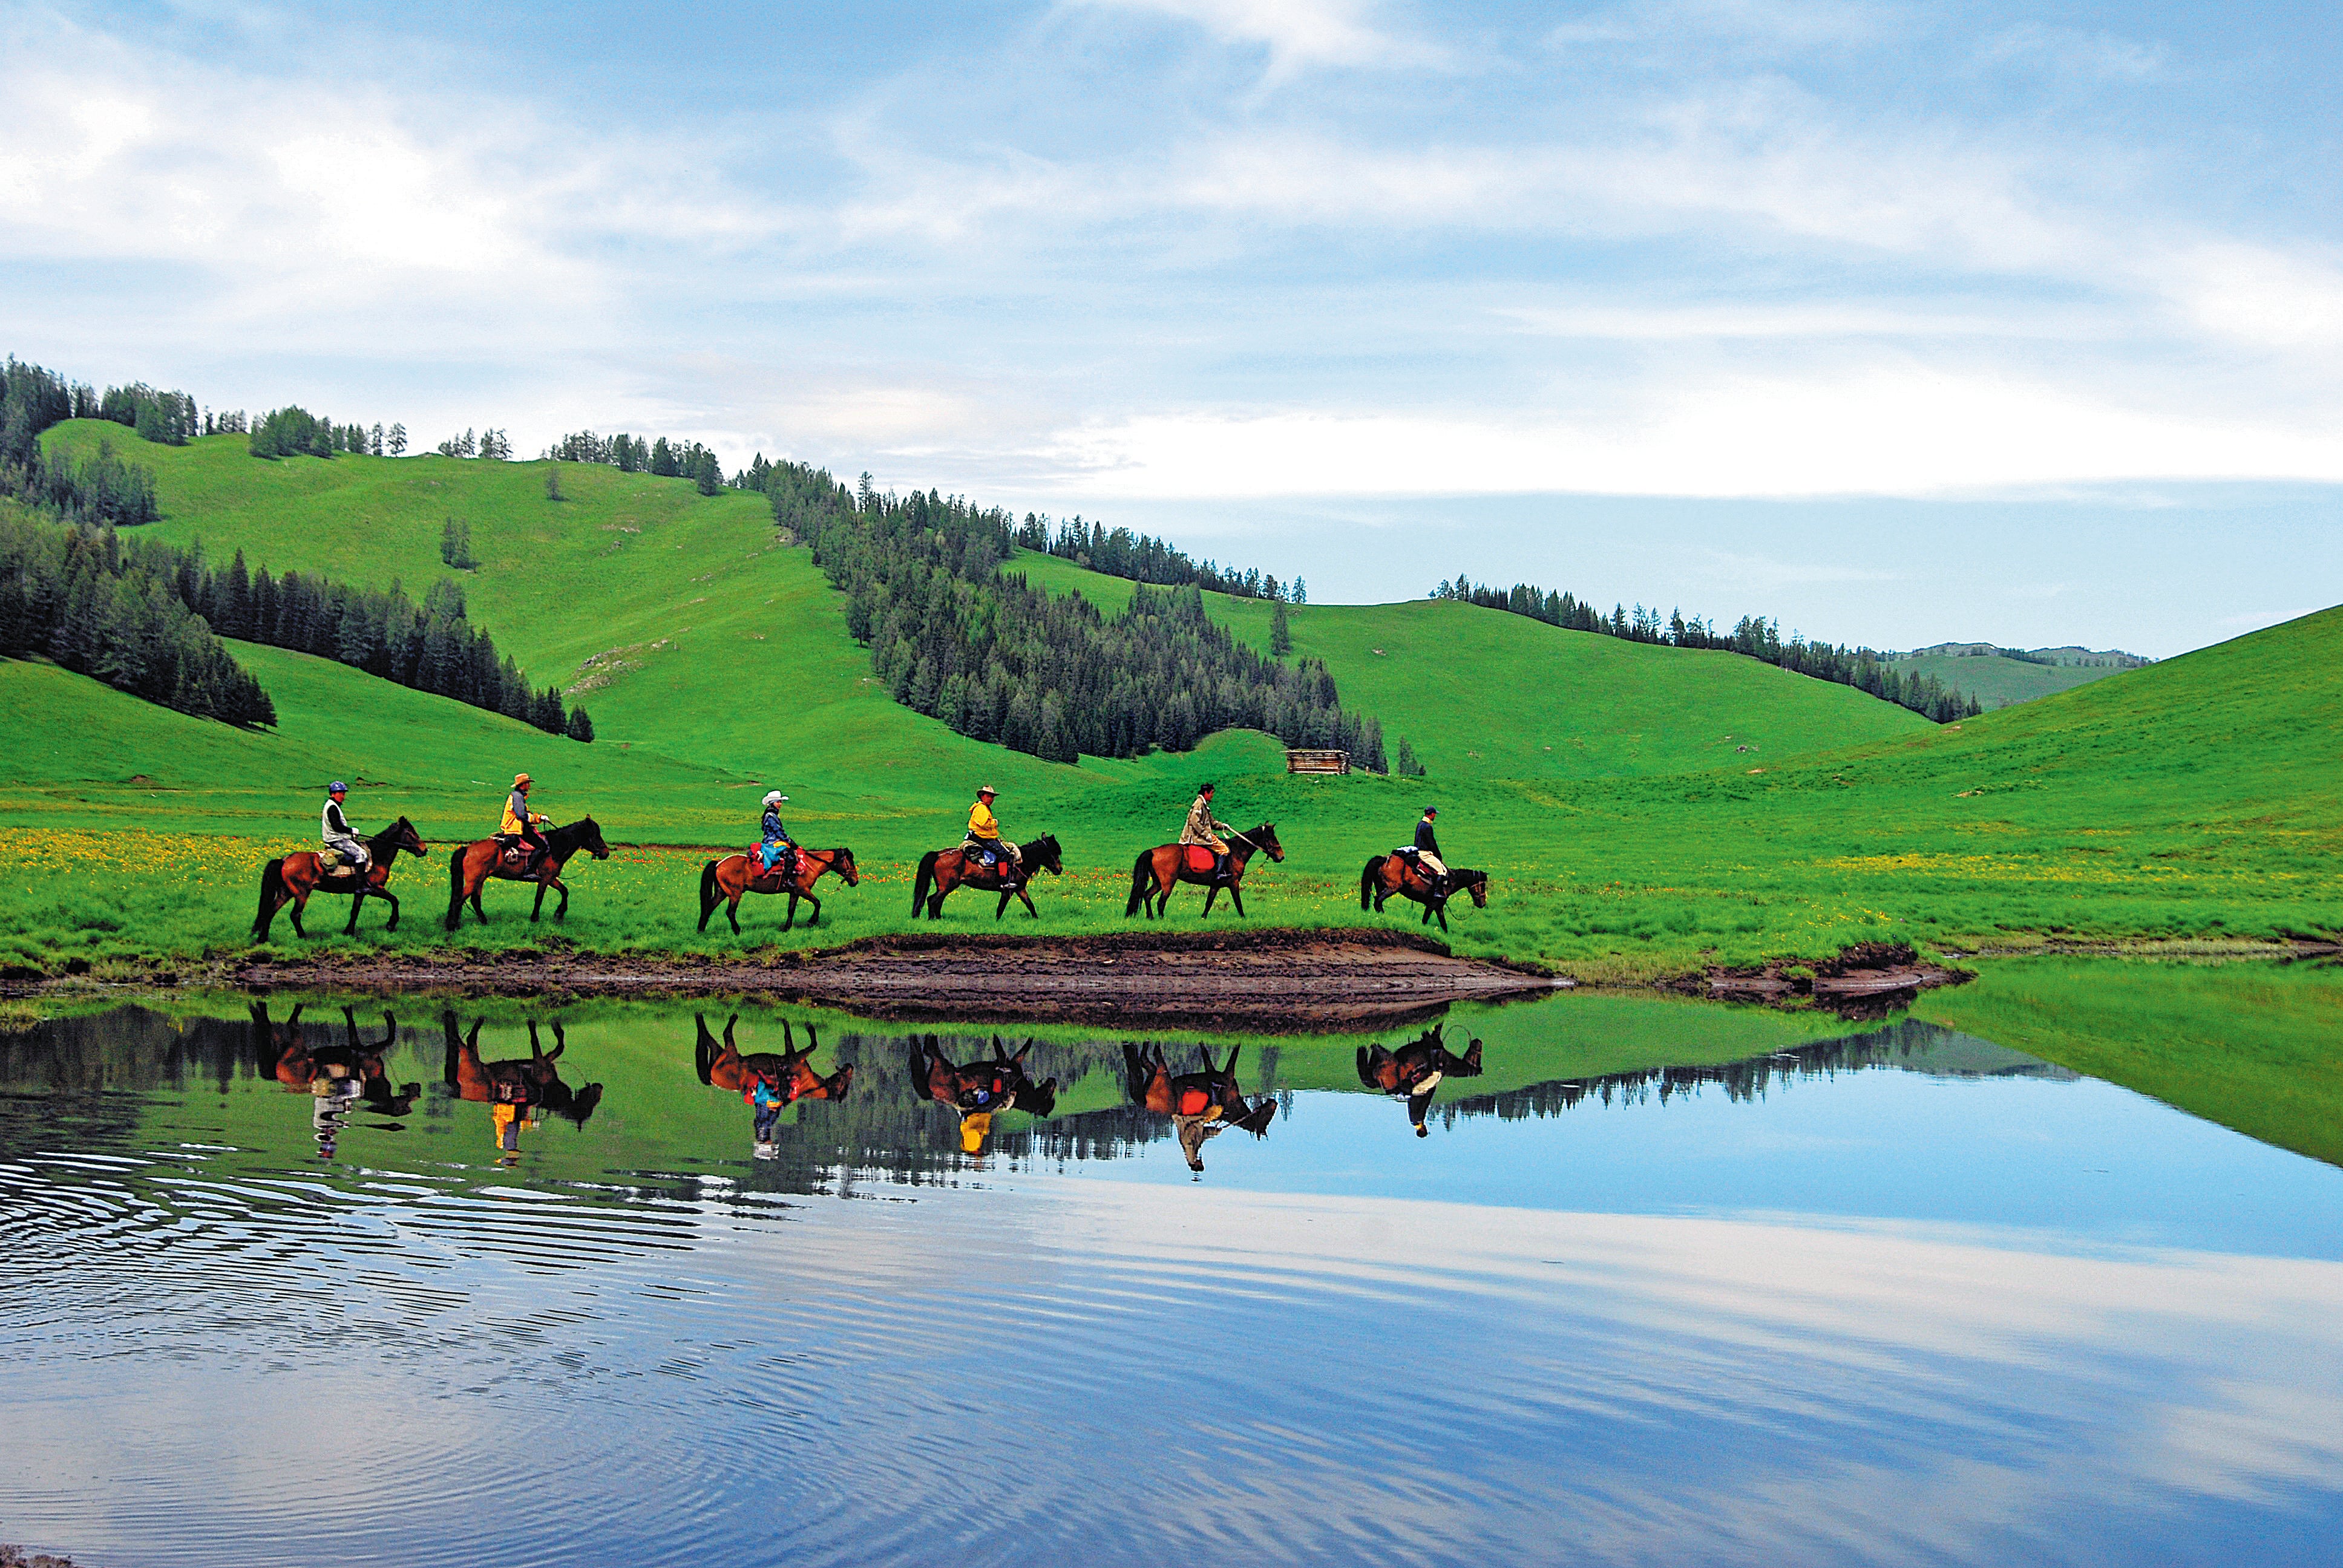 Tourists on a riding tour in the Xinjiang Uygur autonomous region